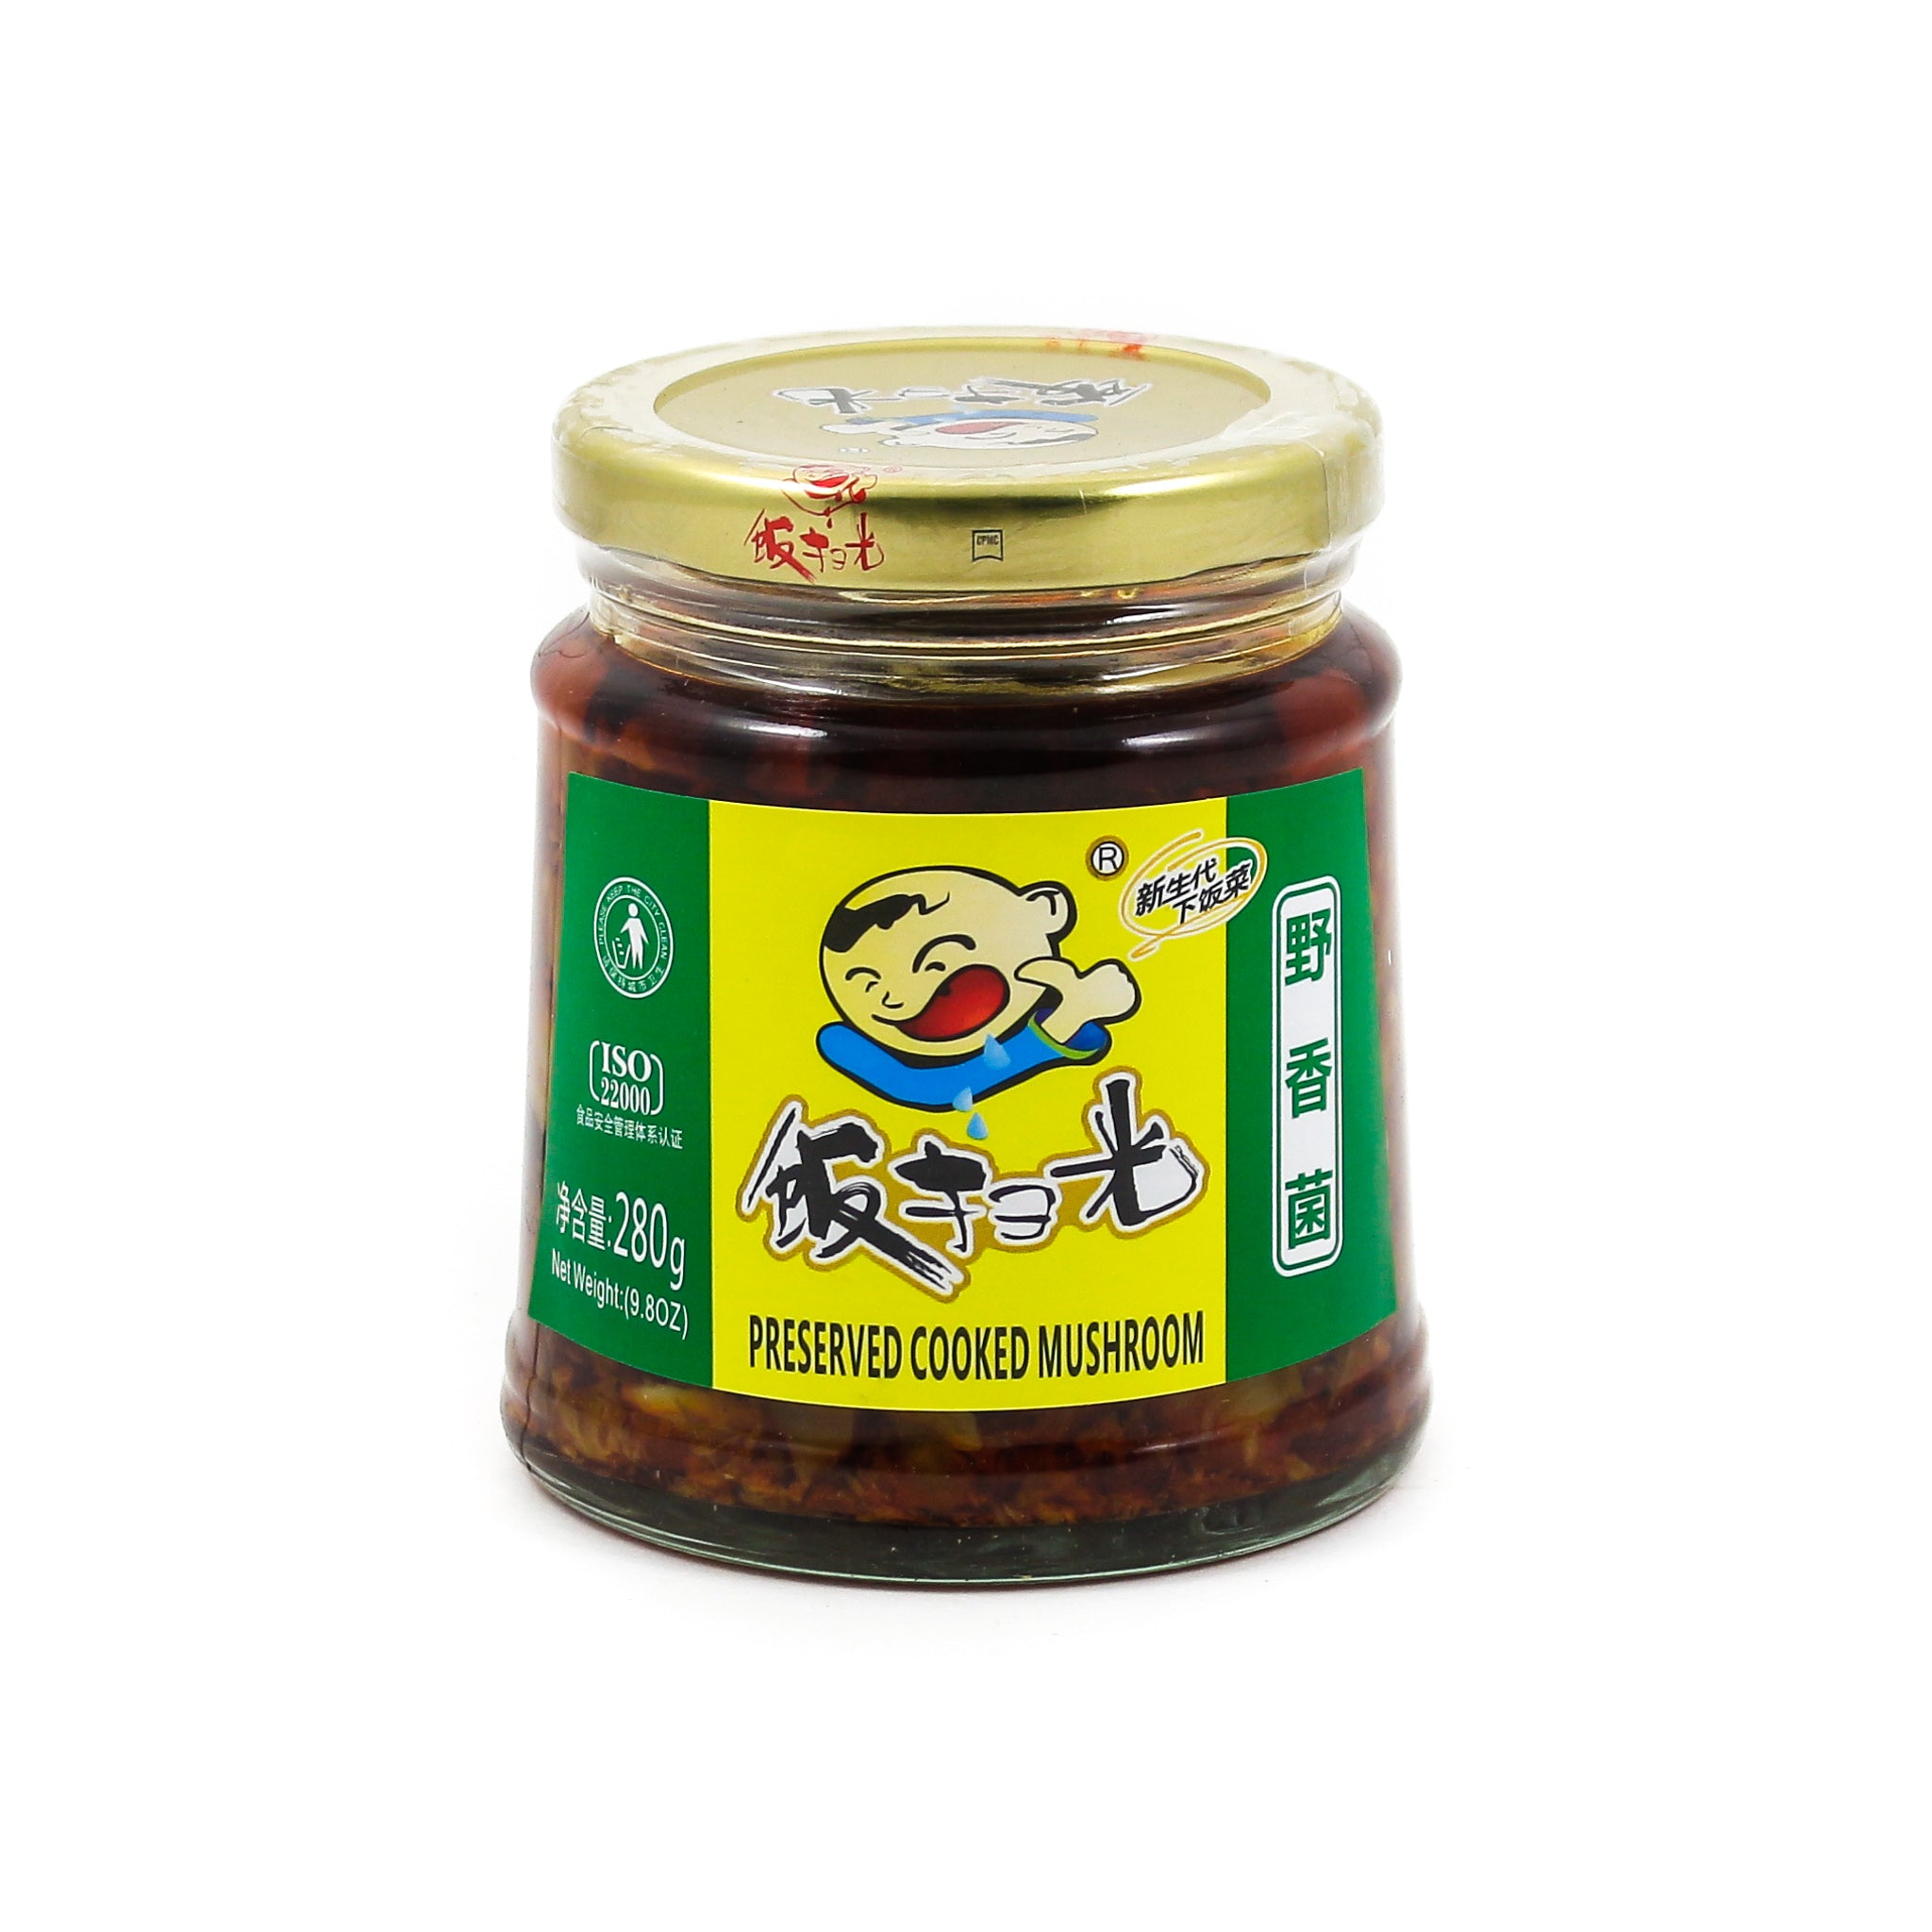 FSG Sichuan Preserved Cooked Fungus 280g Ingredients Sauces & Condiments Asian Sauces & Condiments Chinese Food